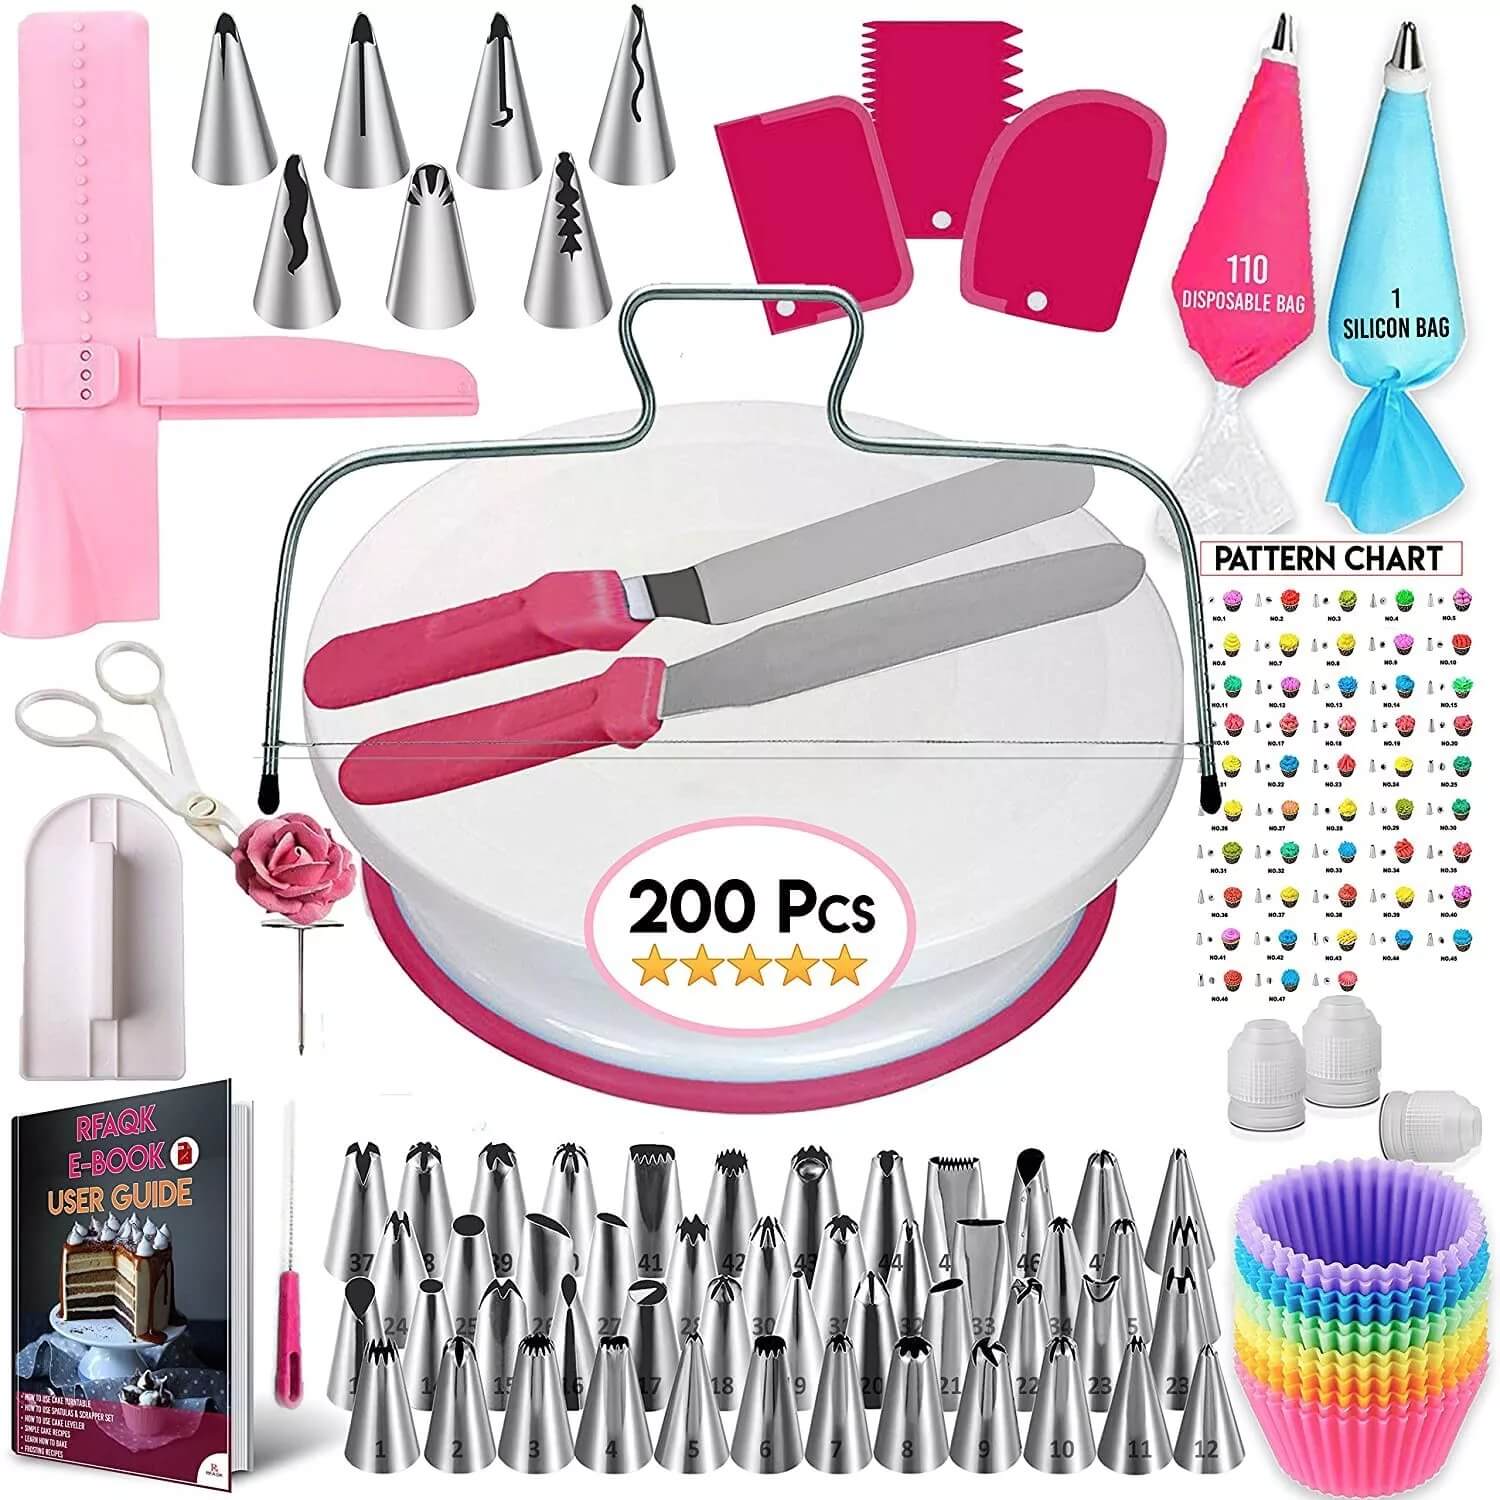 Cake Decorating Supplies Kit for Beginners - LINWEY - Best Cake Decorating Supplies Kit for Beginners